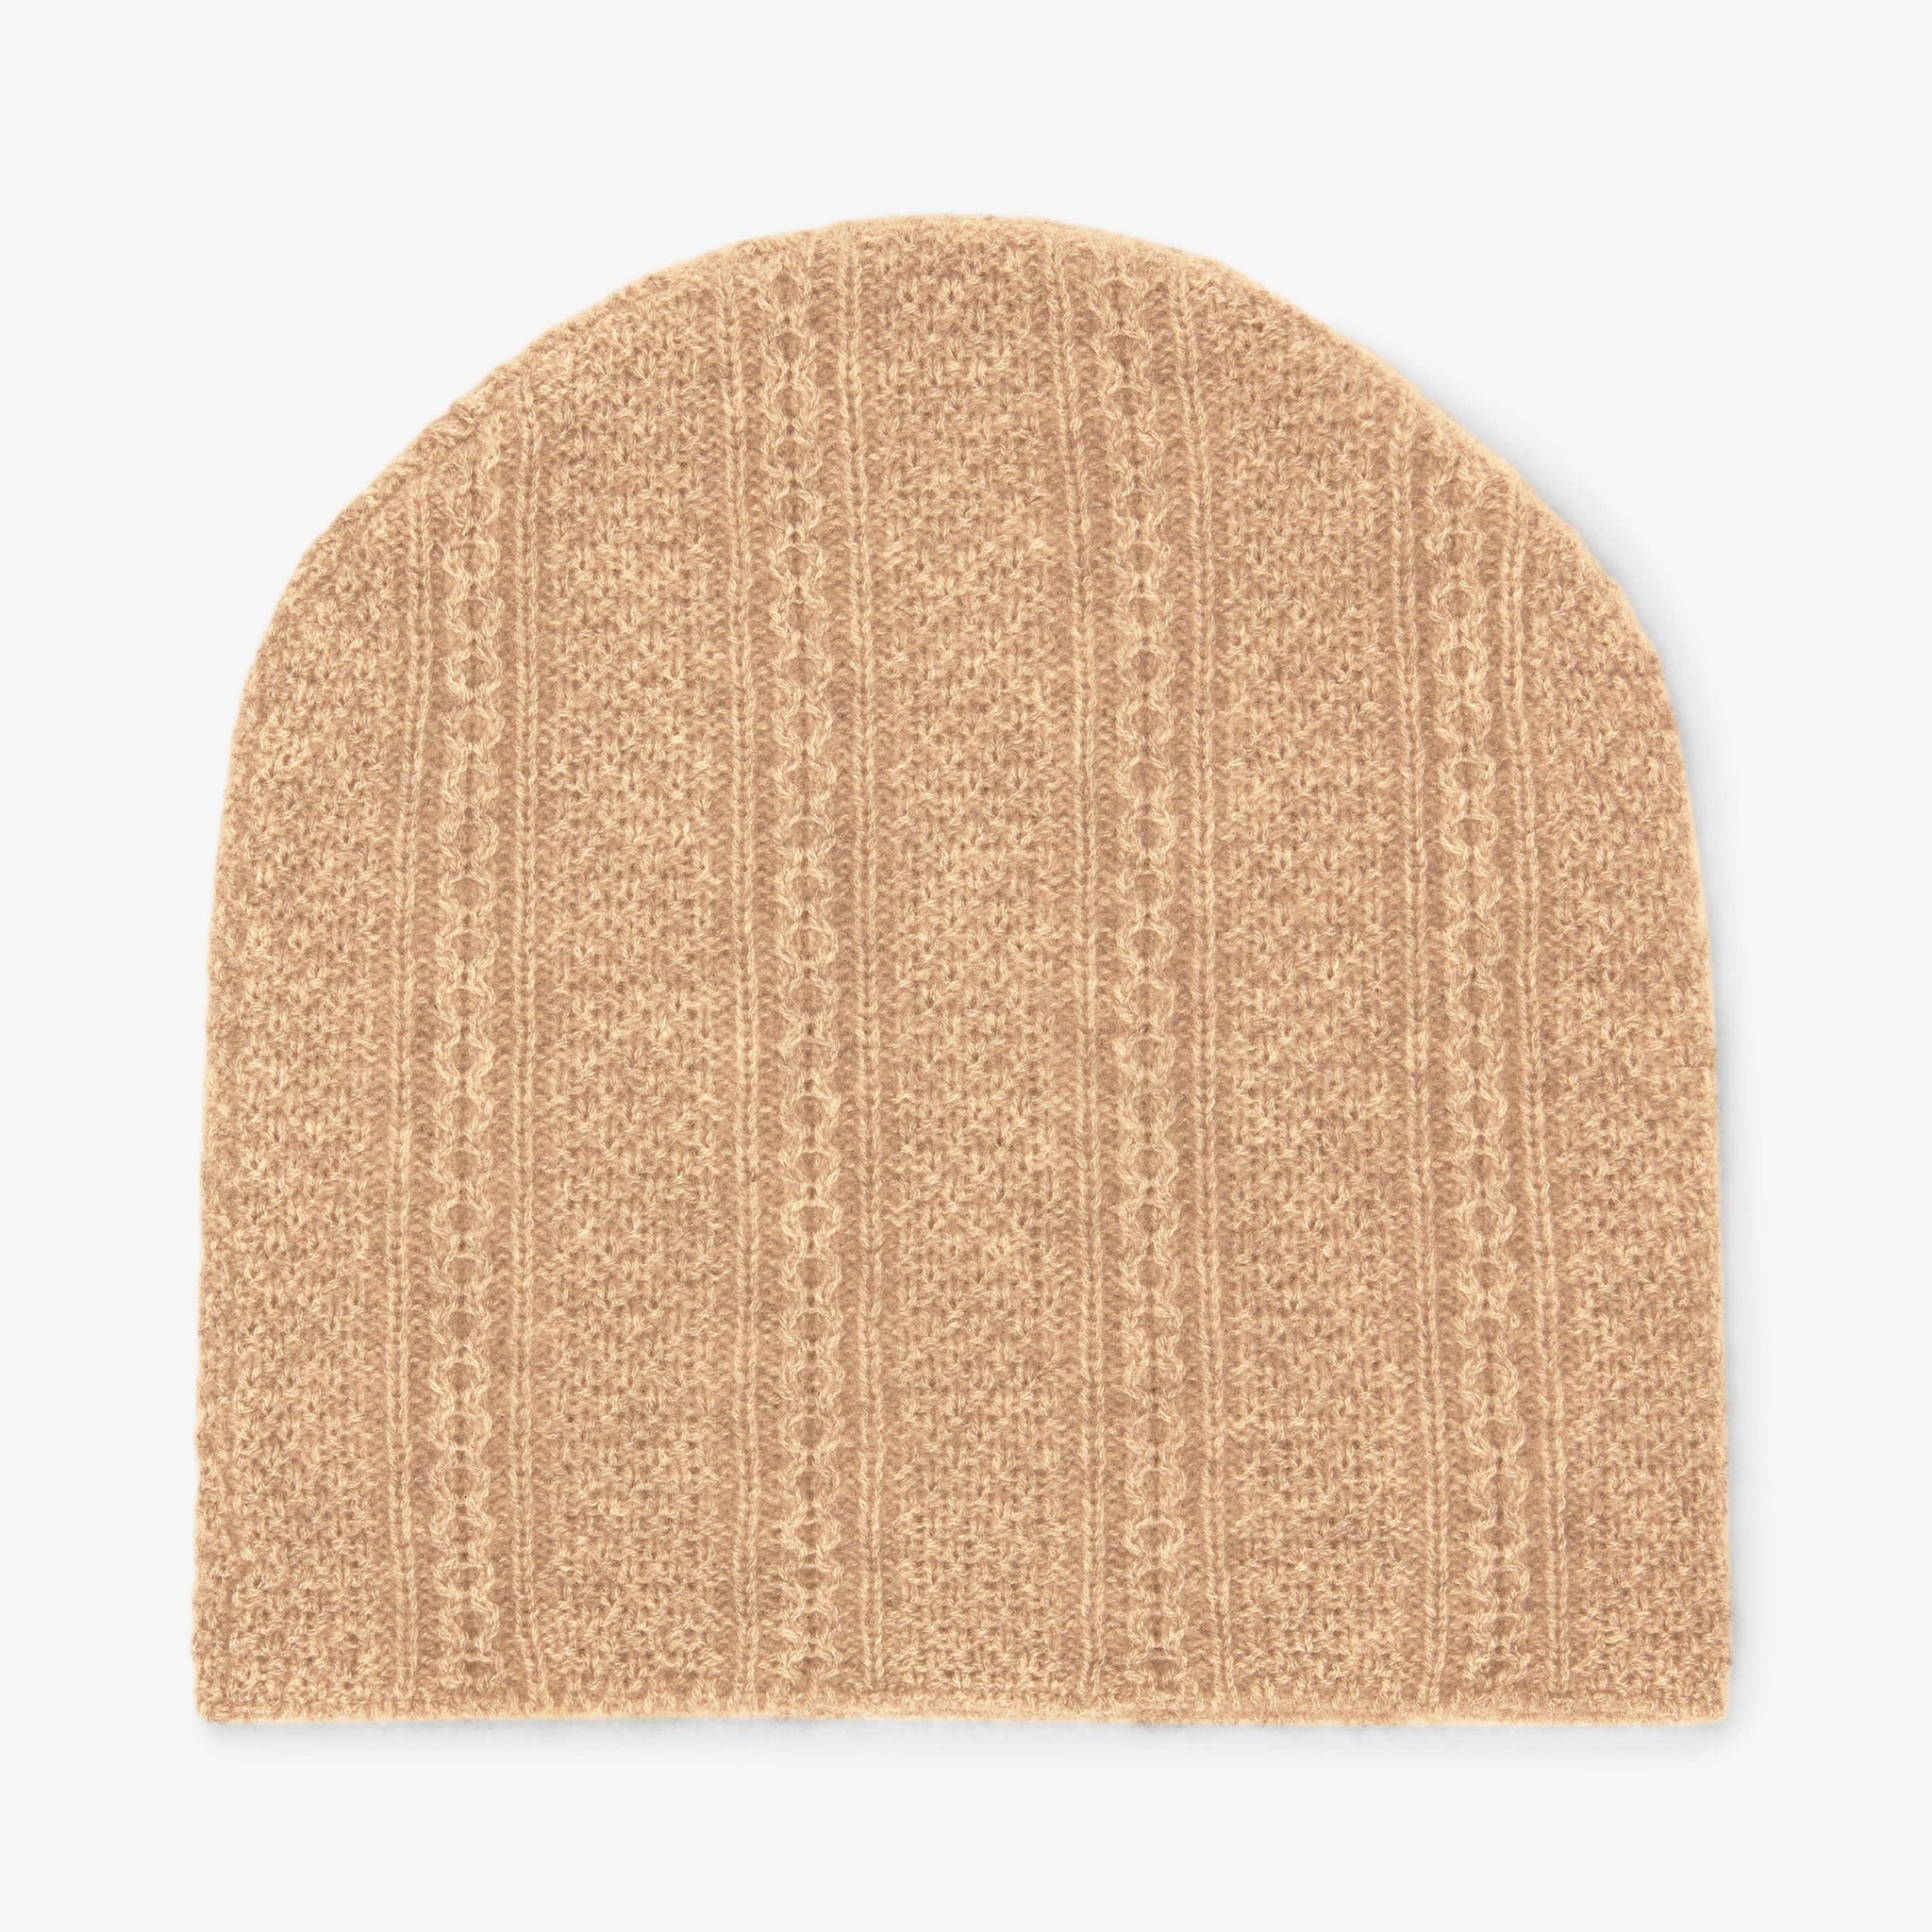 Packshot image of the Circle Cable Beanie—Cashmere in Light Camel 